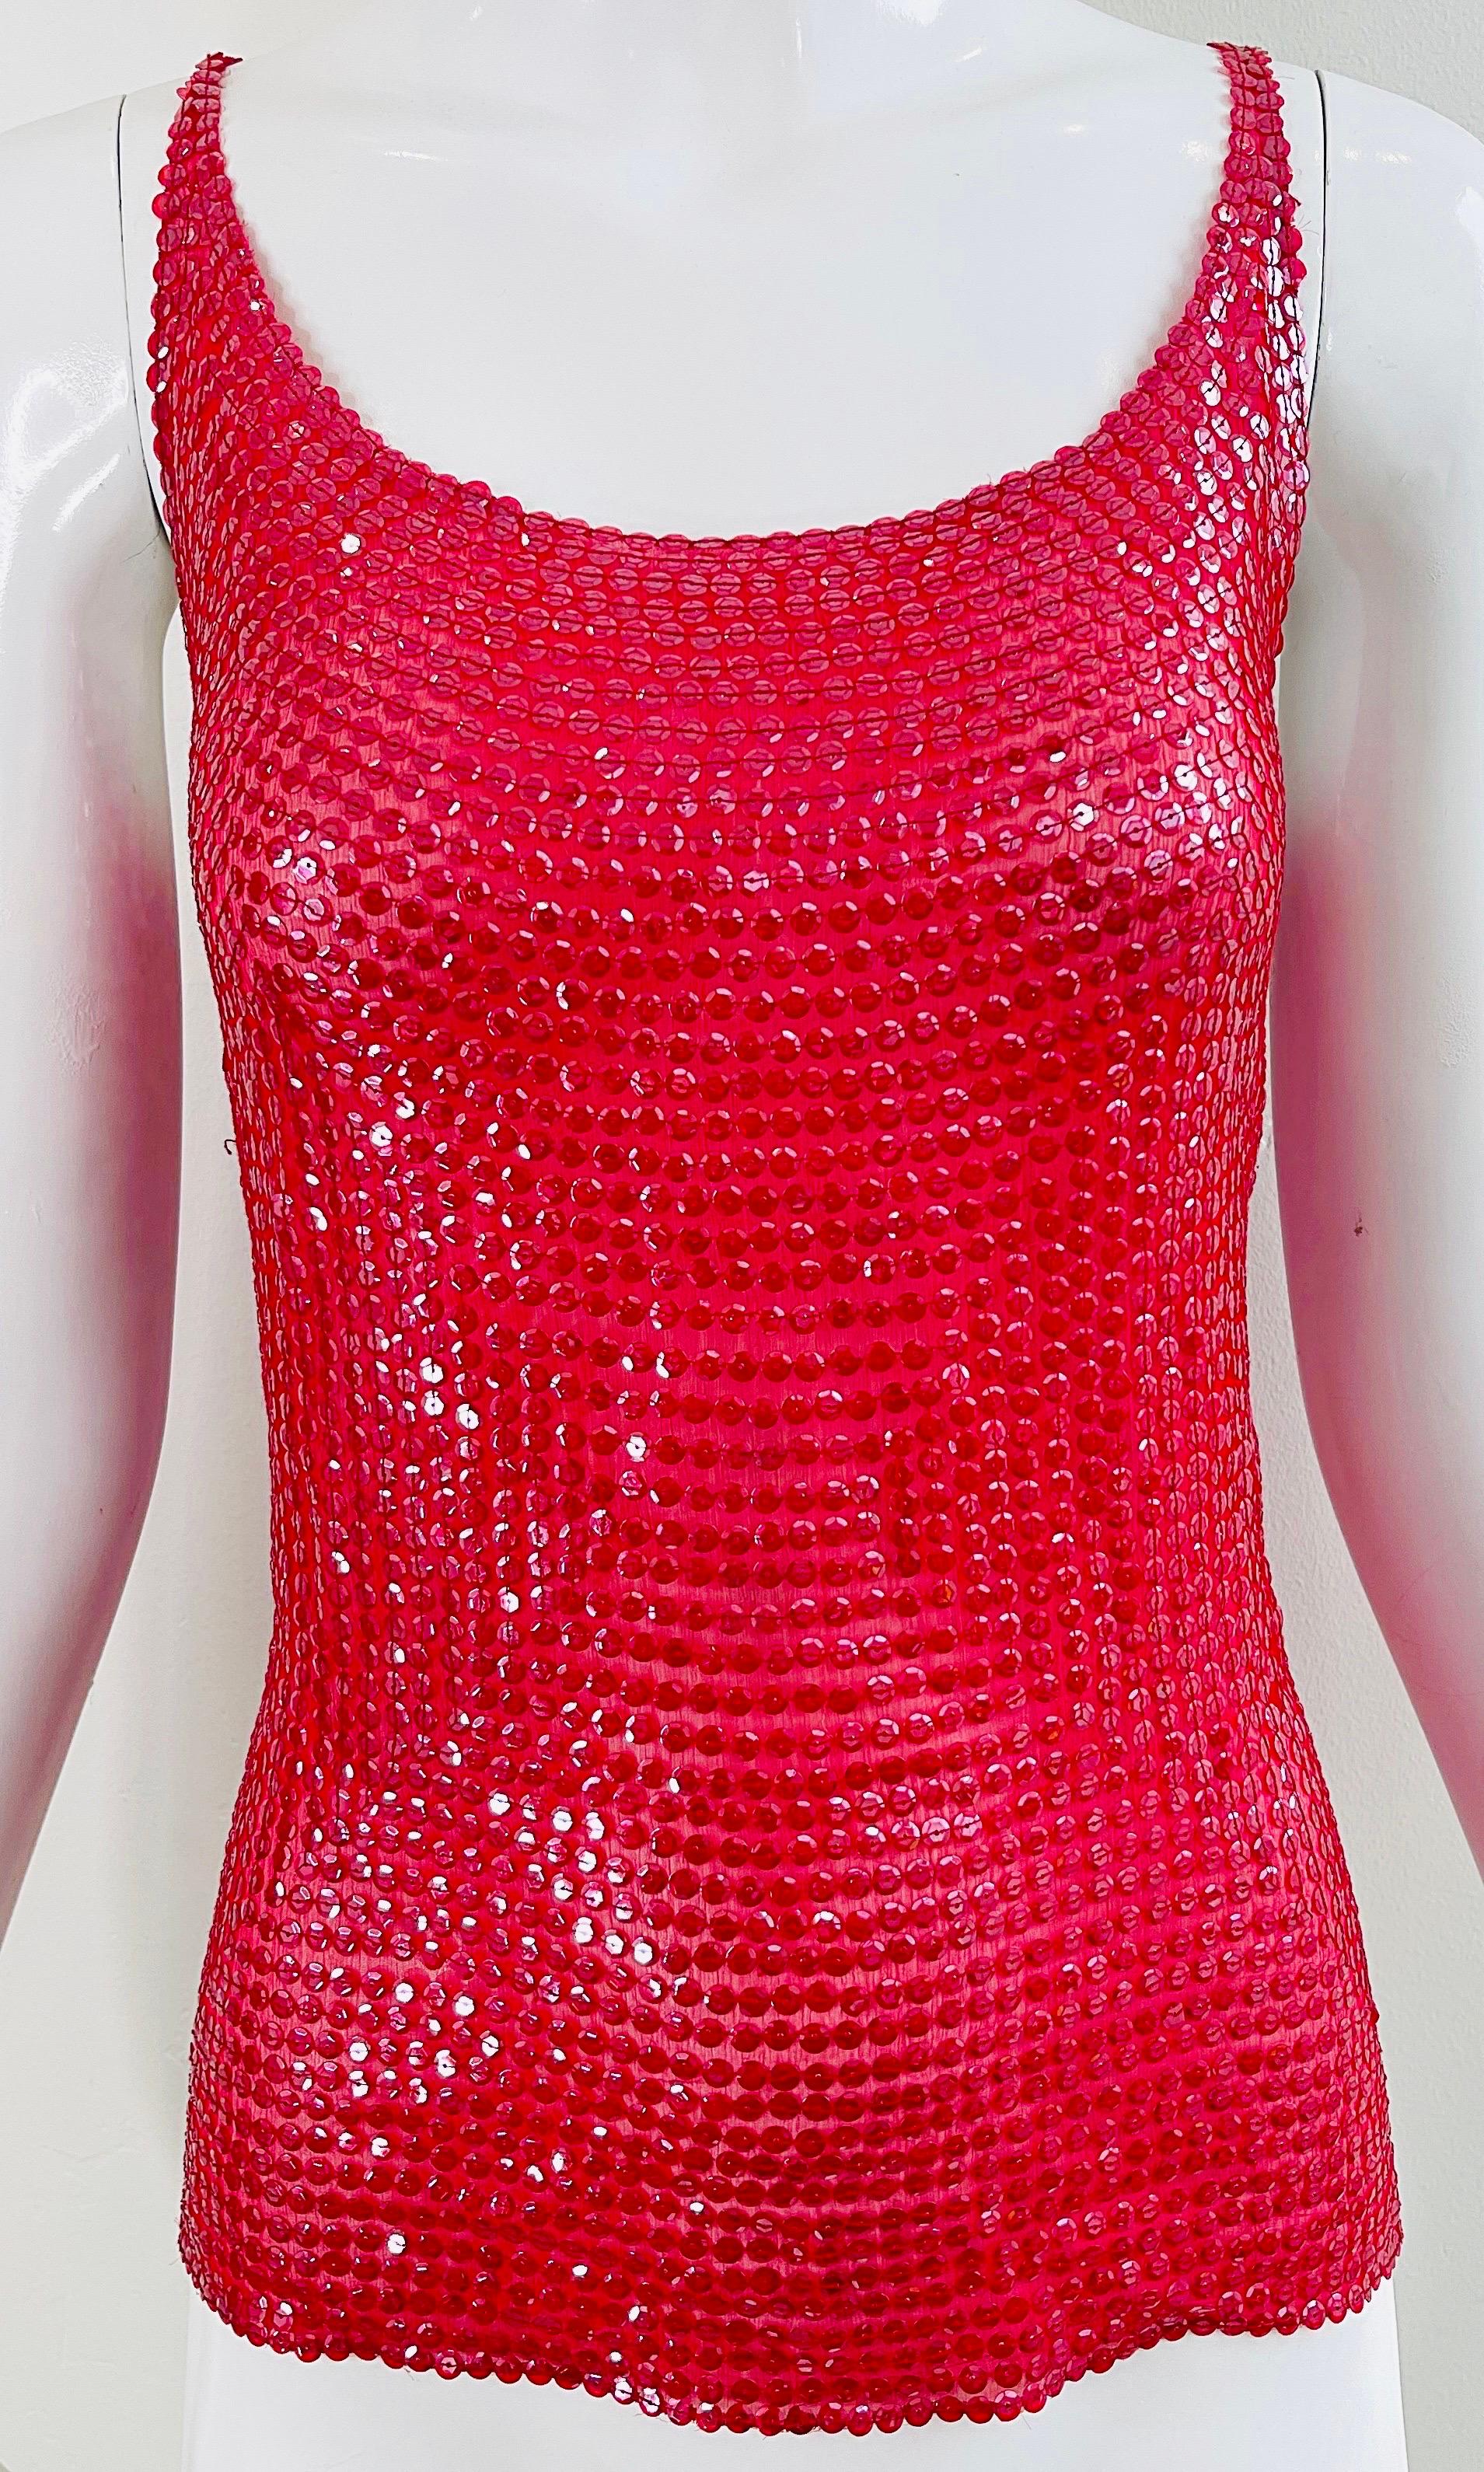 Halston 1970s Lipstick Red Silk Chiffon Fully Sequin Vintage 70s Sleeveless Top For Sale 2